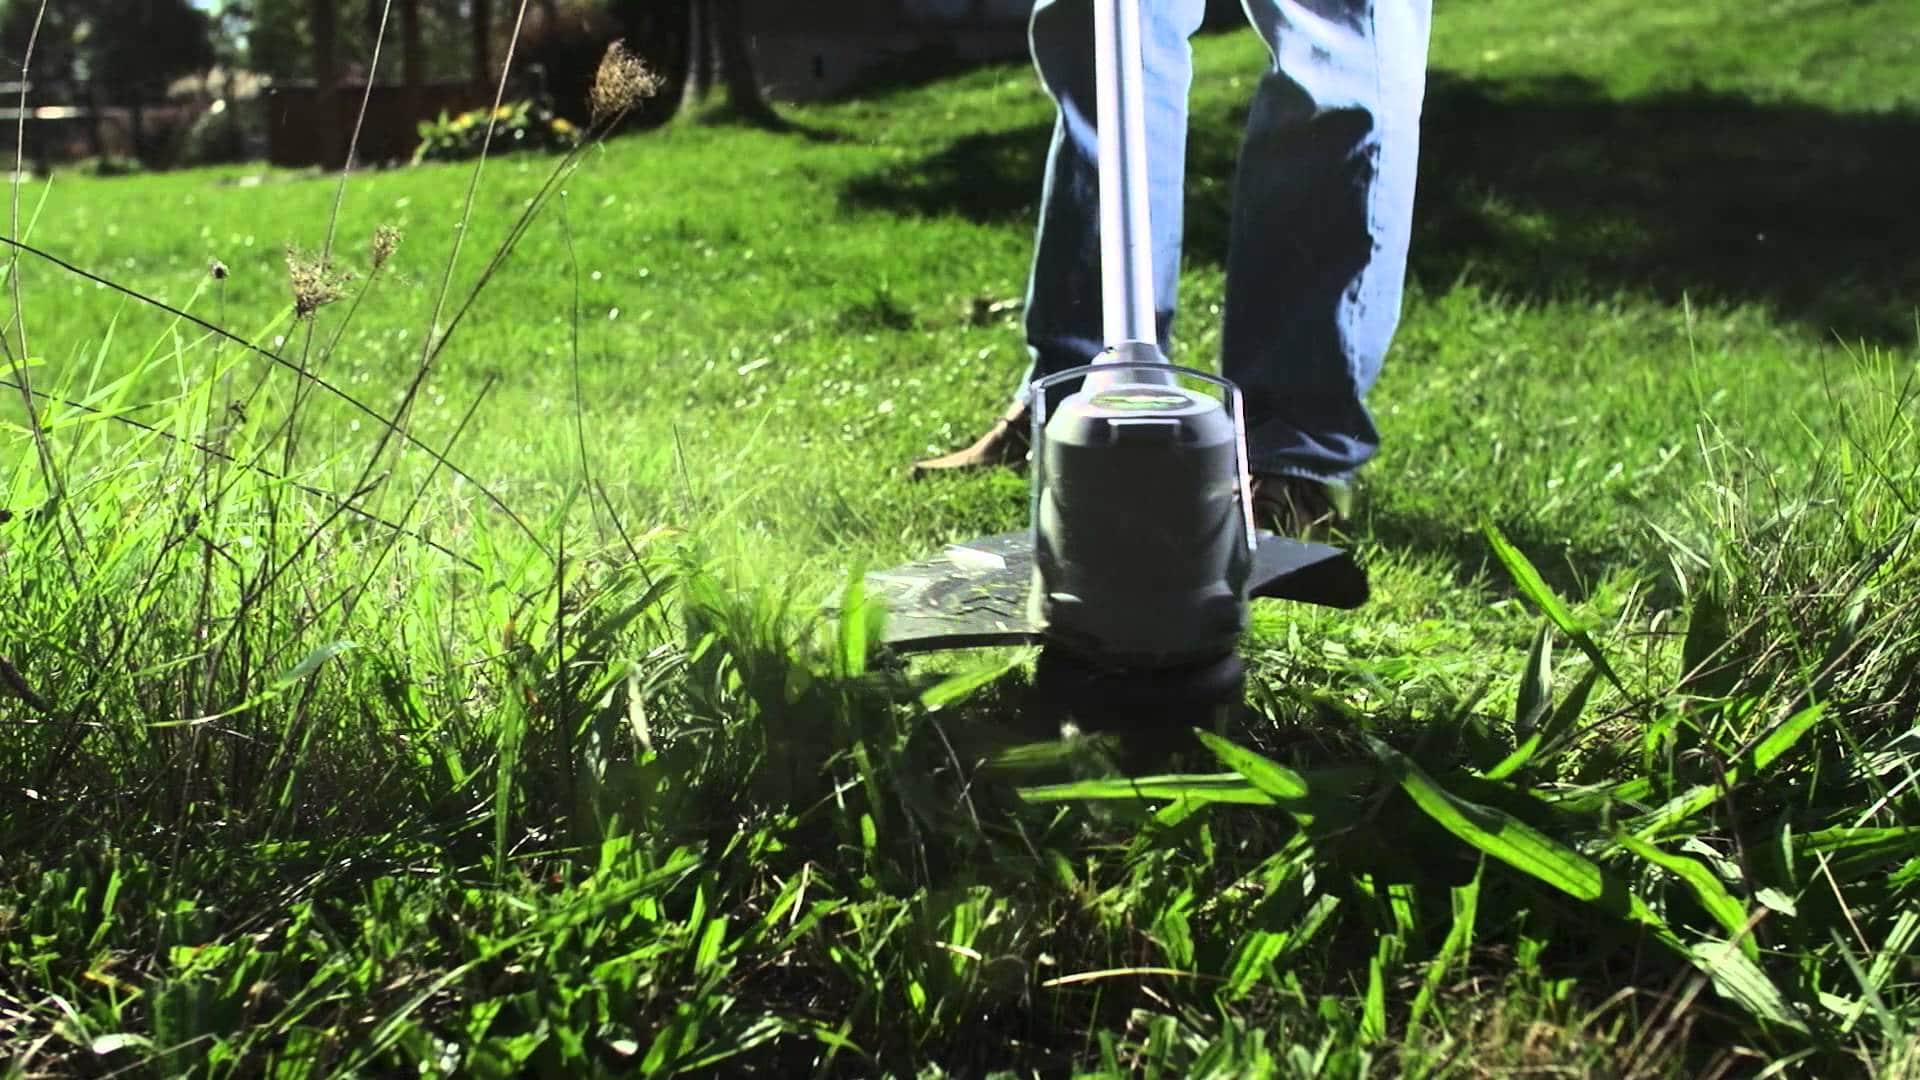 Properly Using an Electric Weed Eater - BackyardWorkshop.com